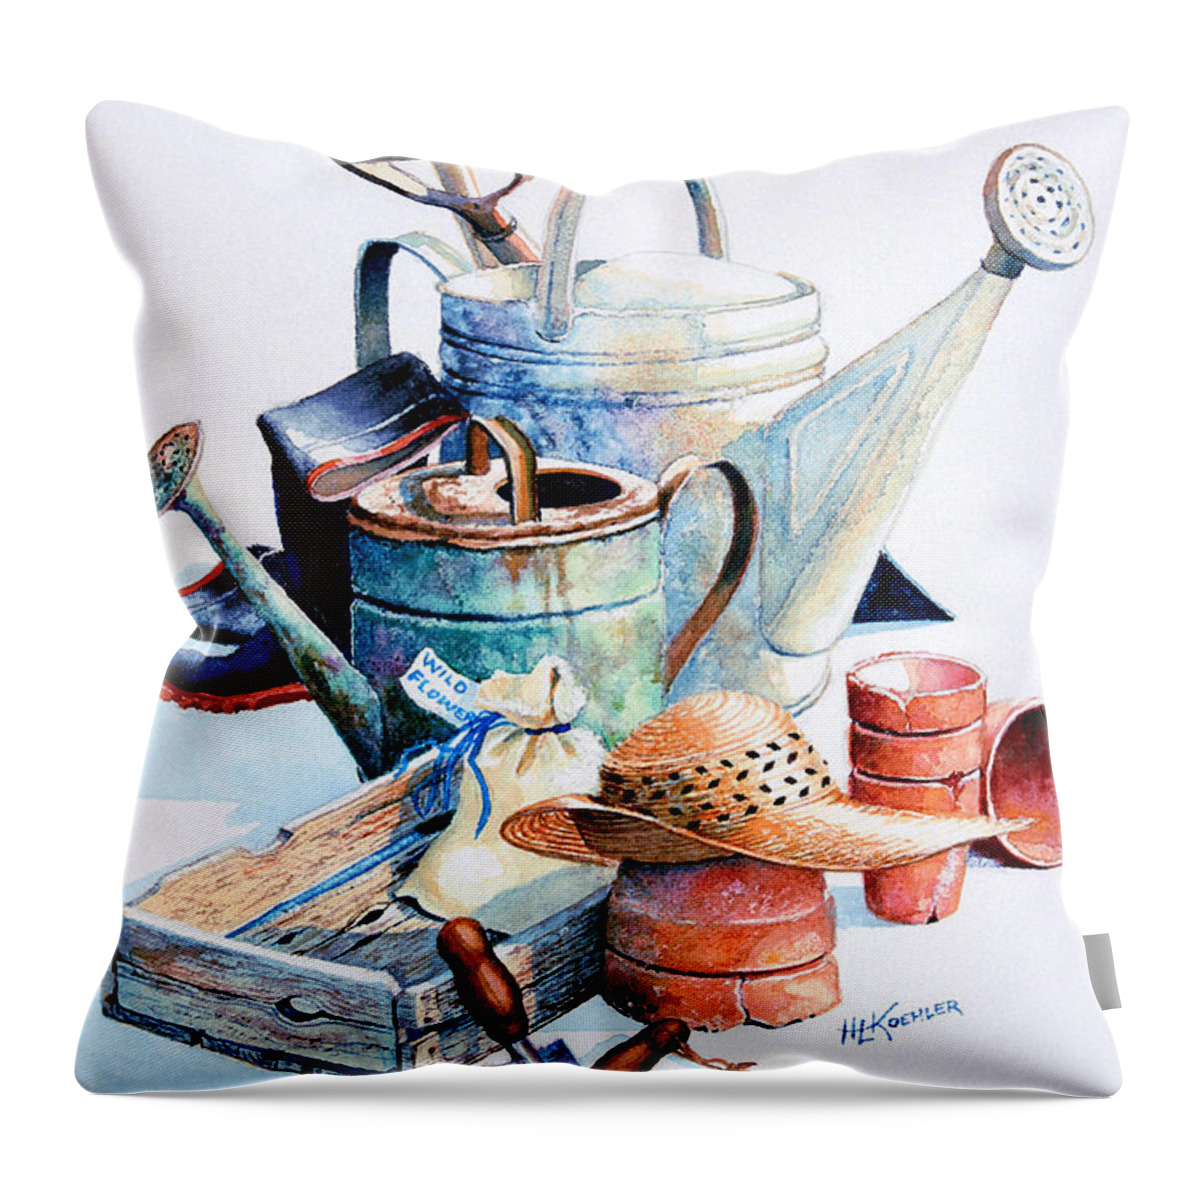 Garden Throw Pillow featuring the painting Todays Toil Tomorrows Pleasure II by Hanne Lore Koehler